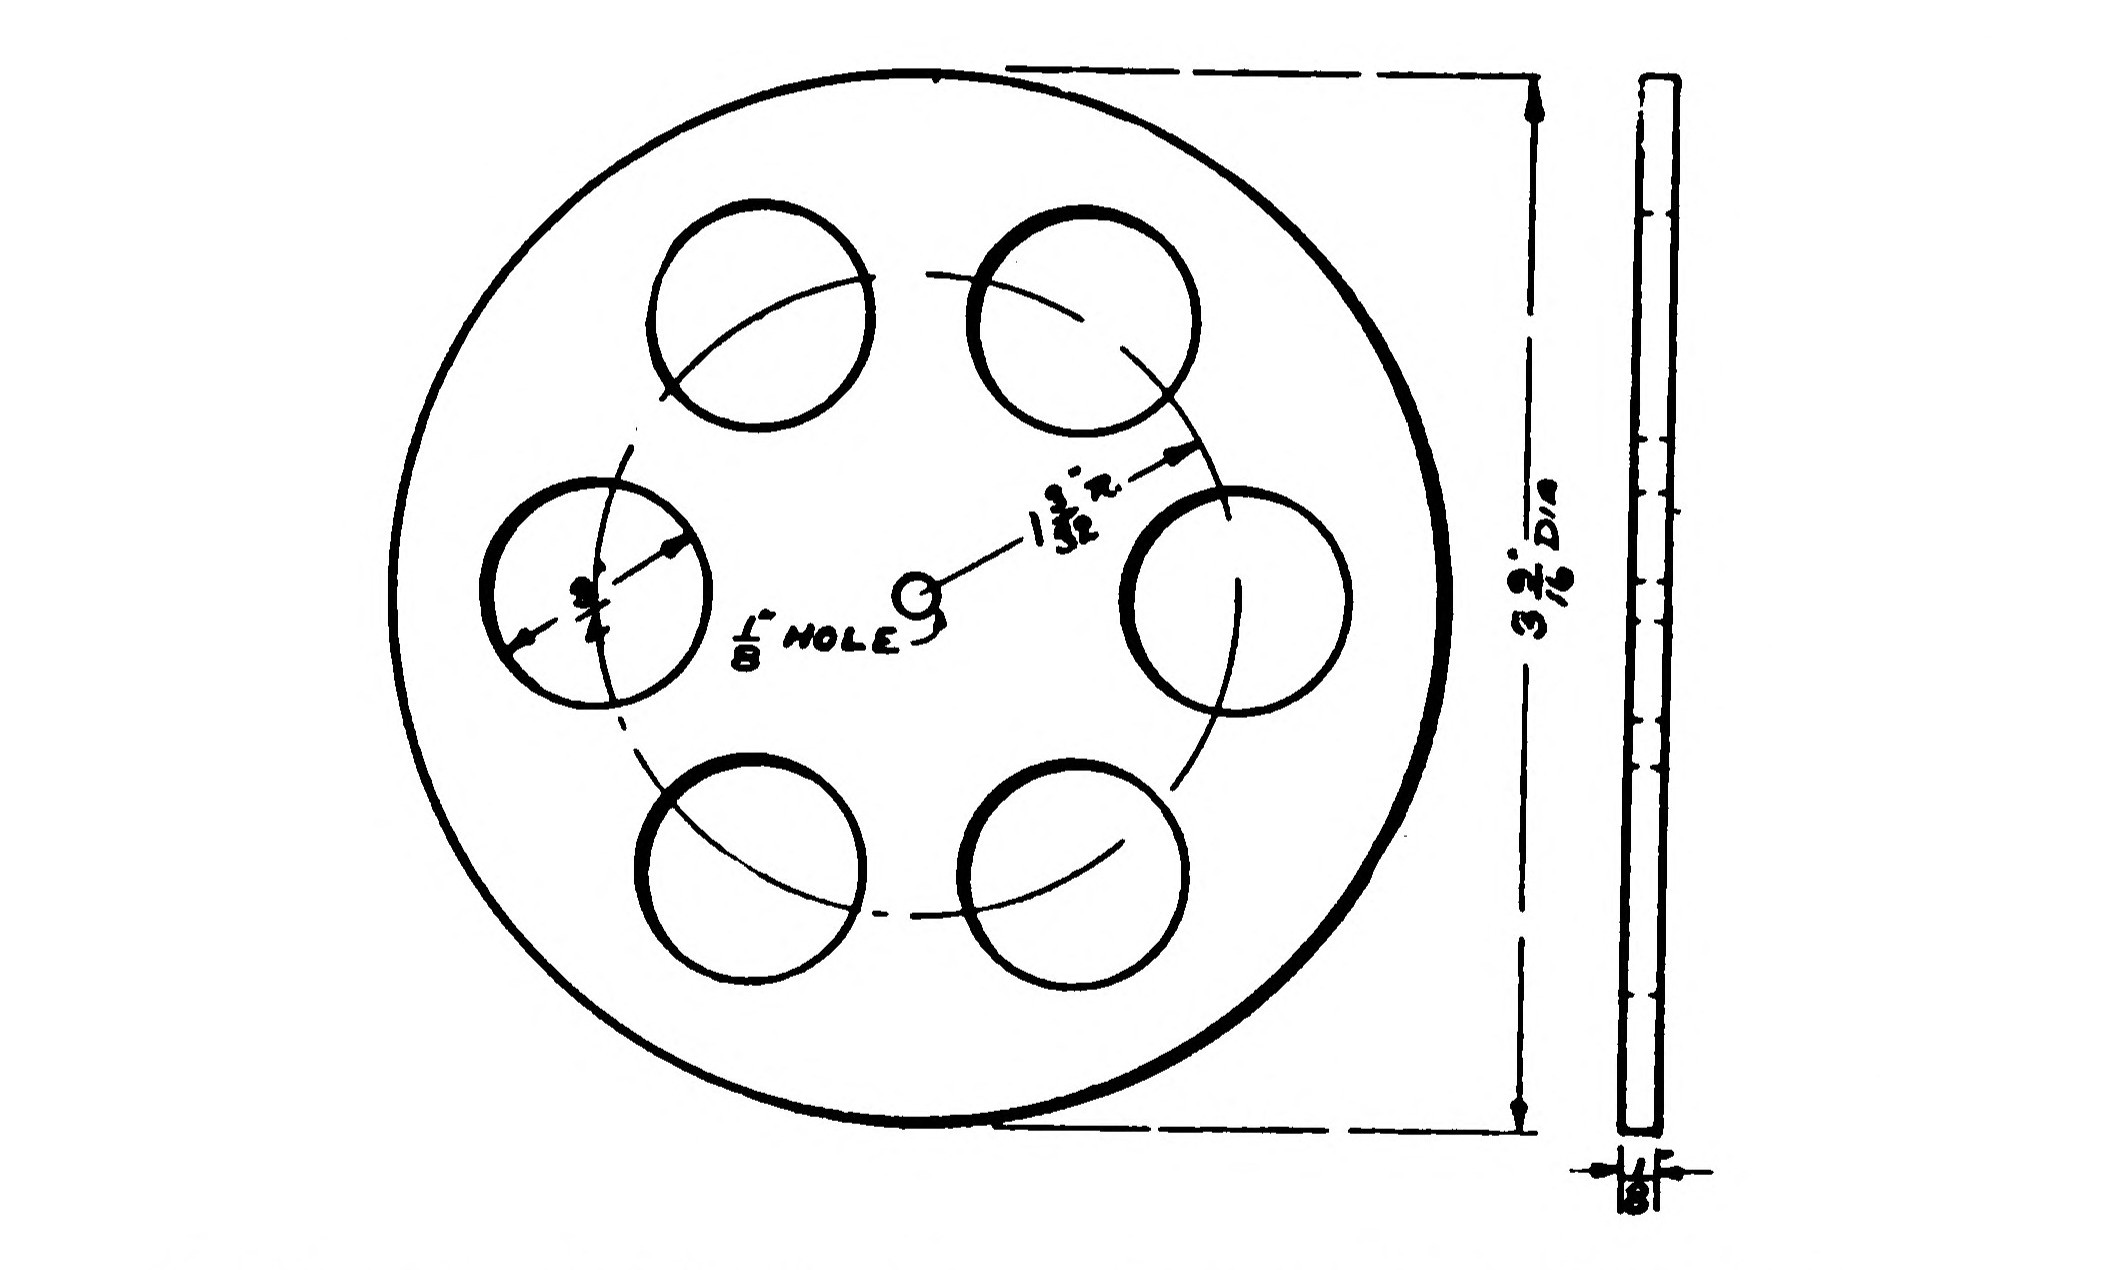 FIG. 151.—A Flywheel may be cut from sheet iron.